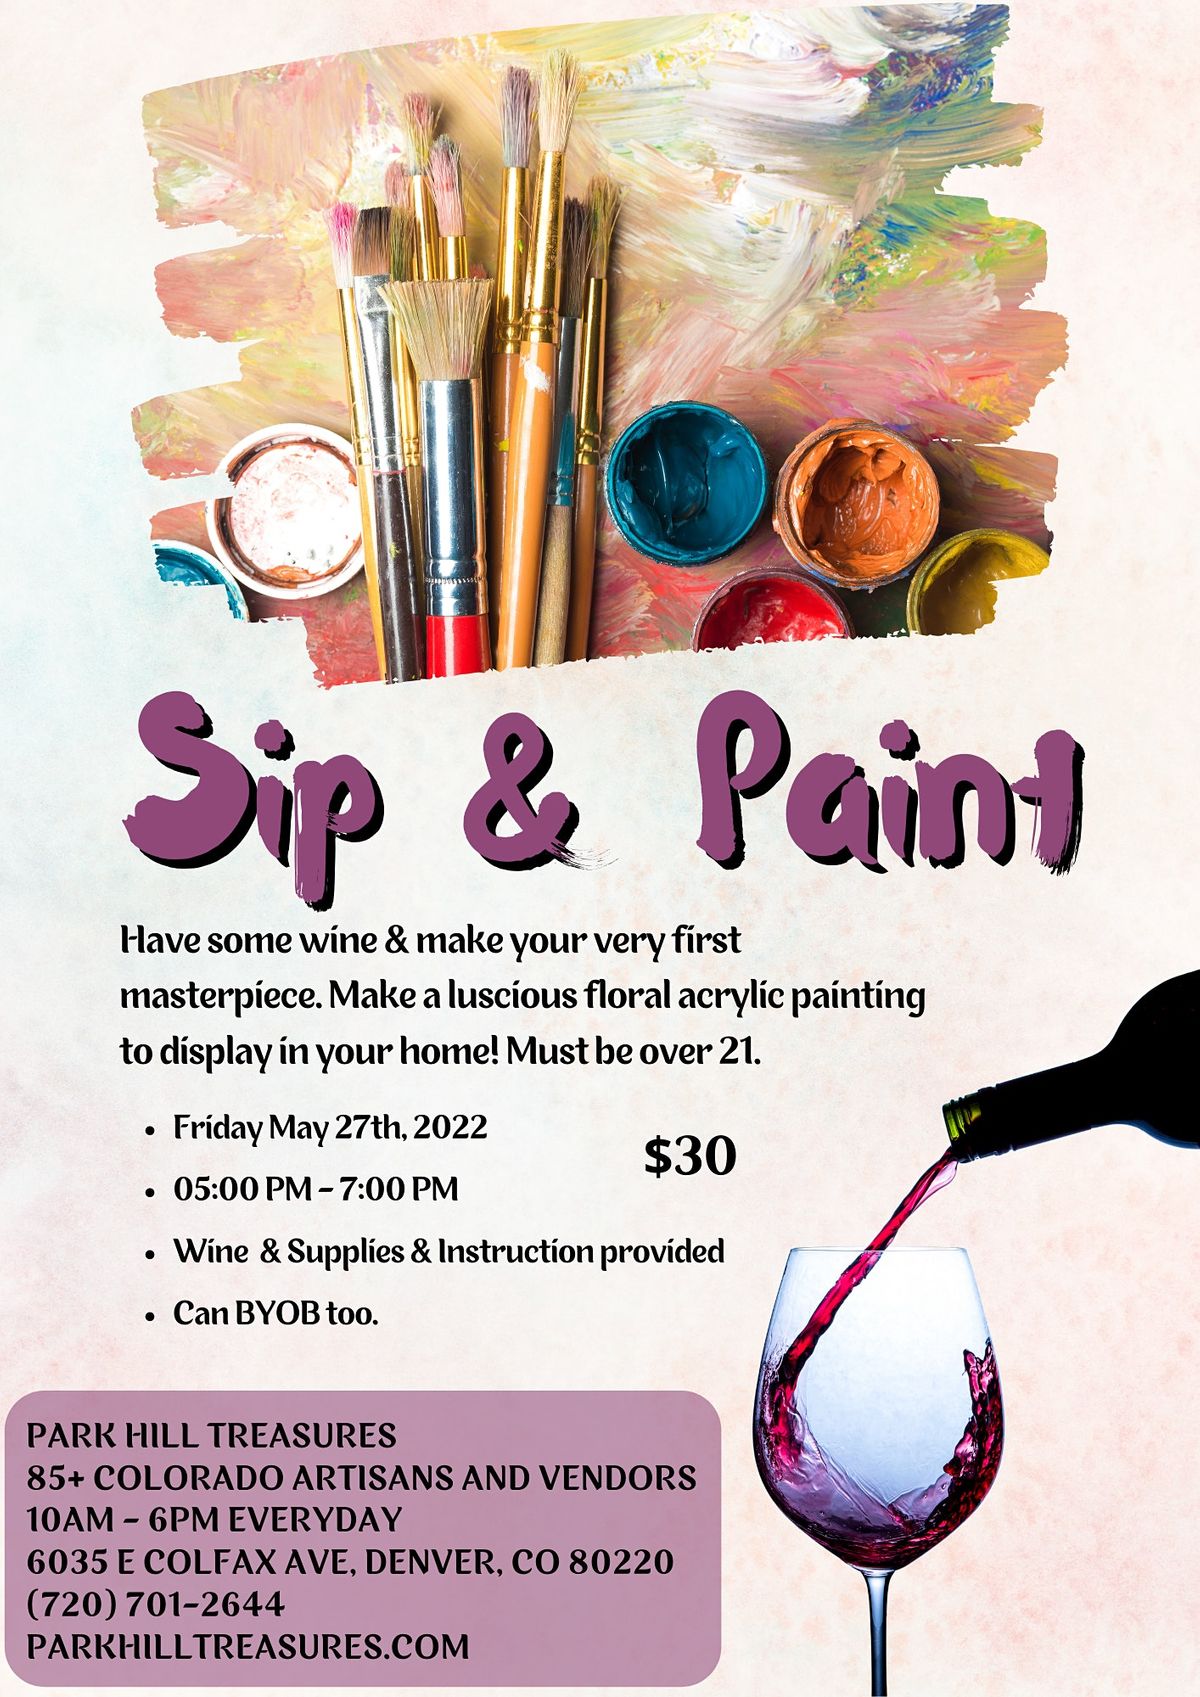 Sip & Paint: Red, White & Blue